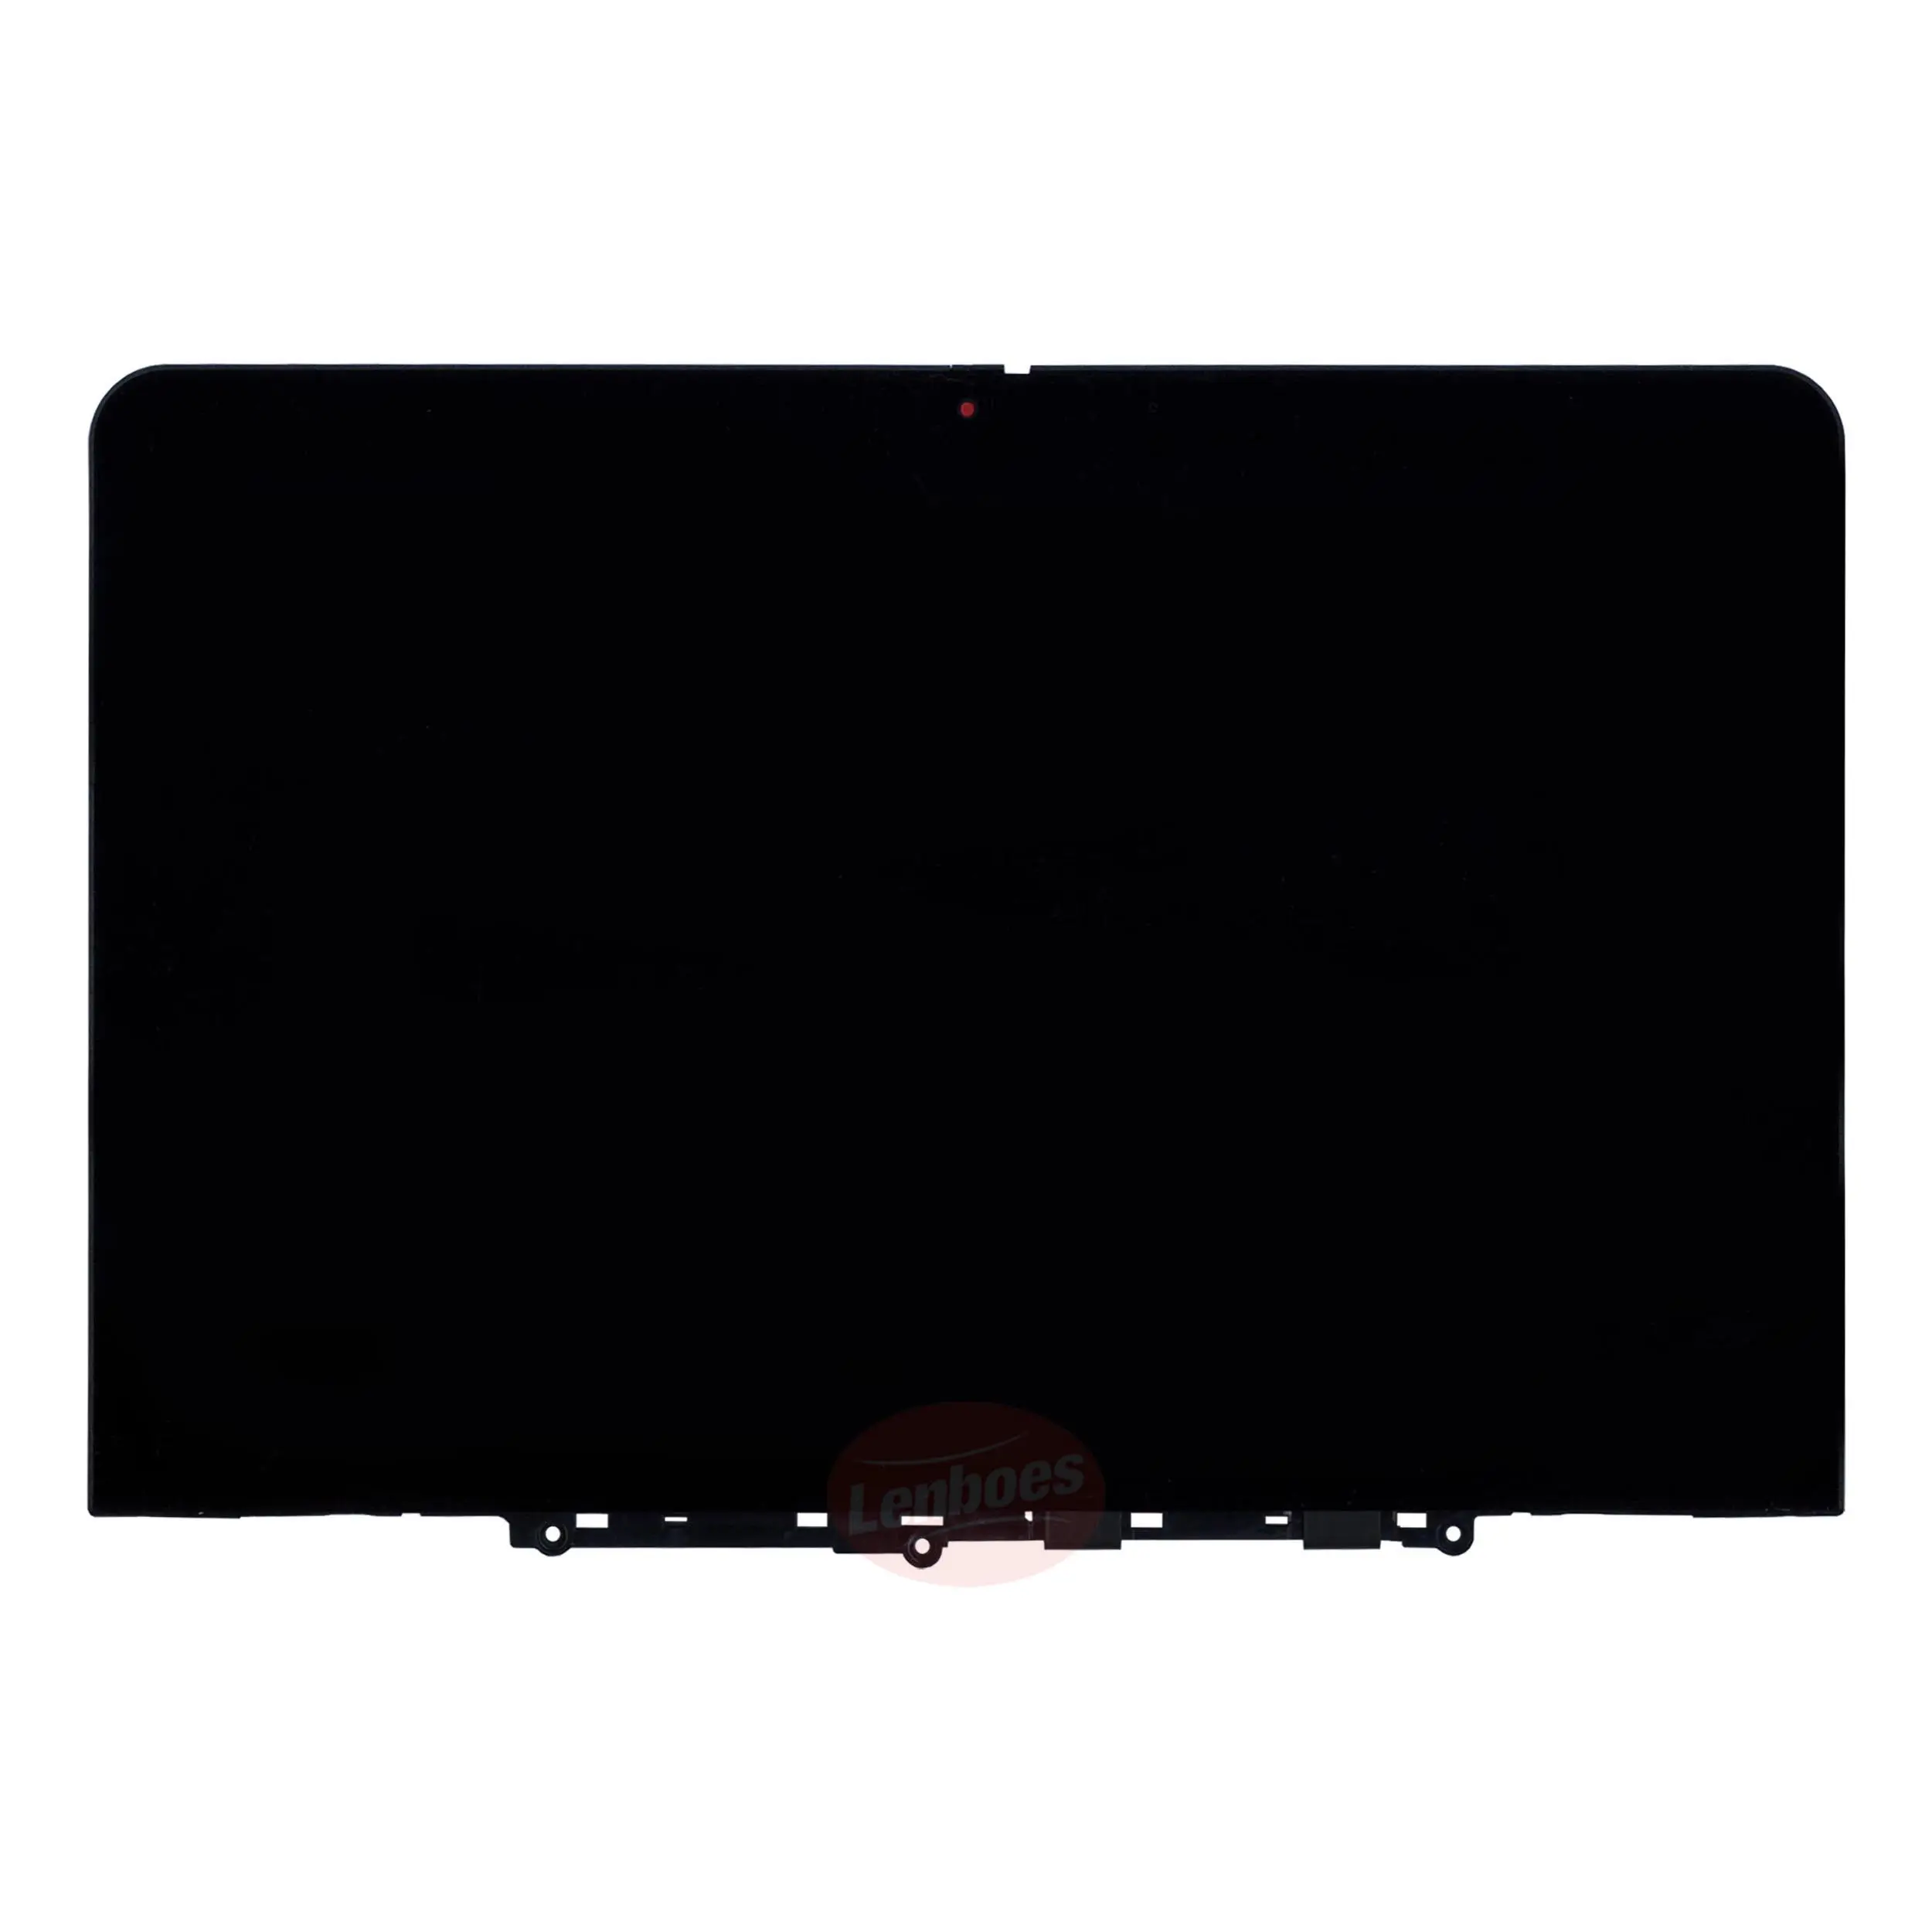 5M11C85597 Laptop LCD Screen Touch Glass Digitizer Assembly with Bezel Repair Part for Lenovo 500w Gen 3 LCD Display Replacement